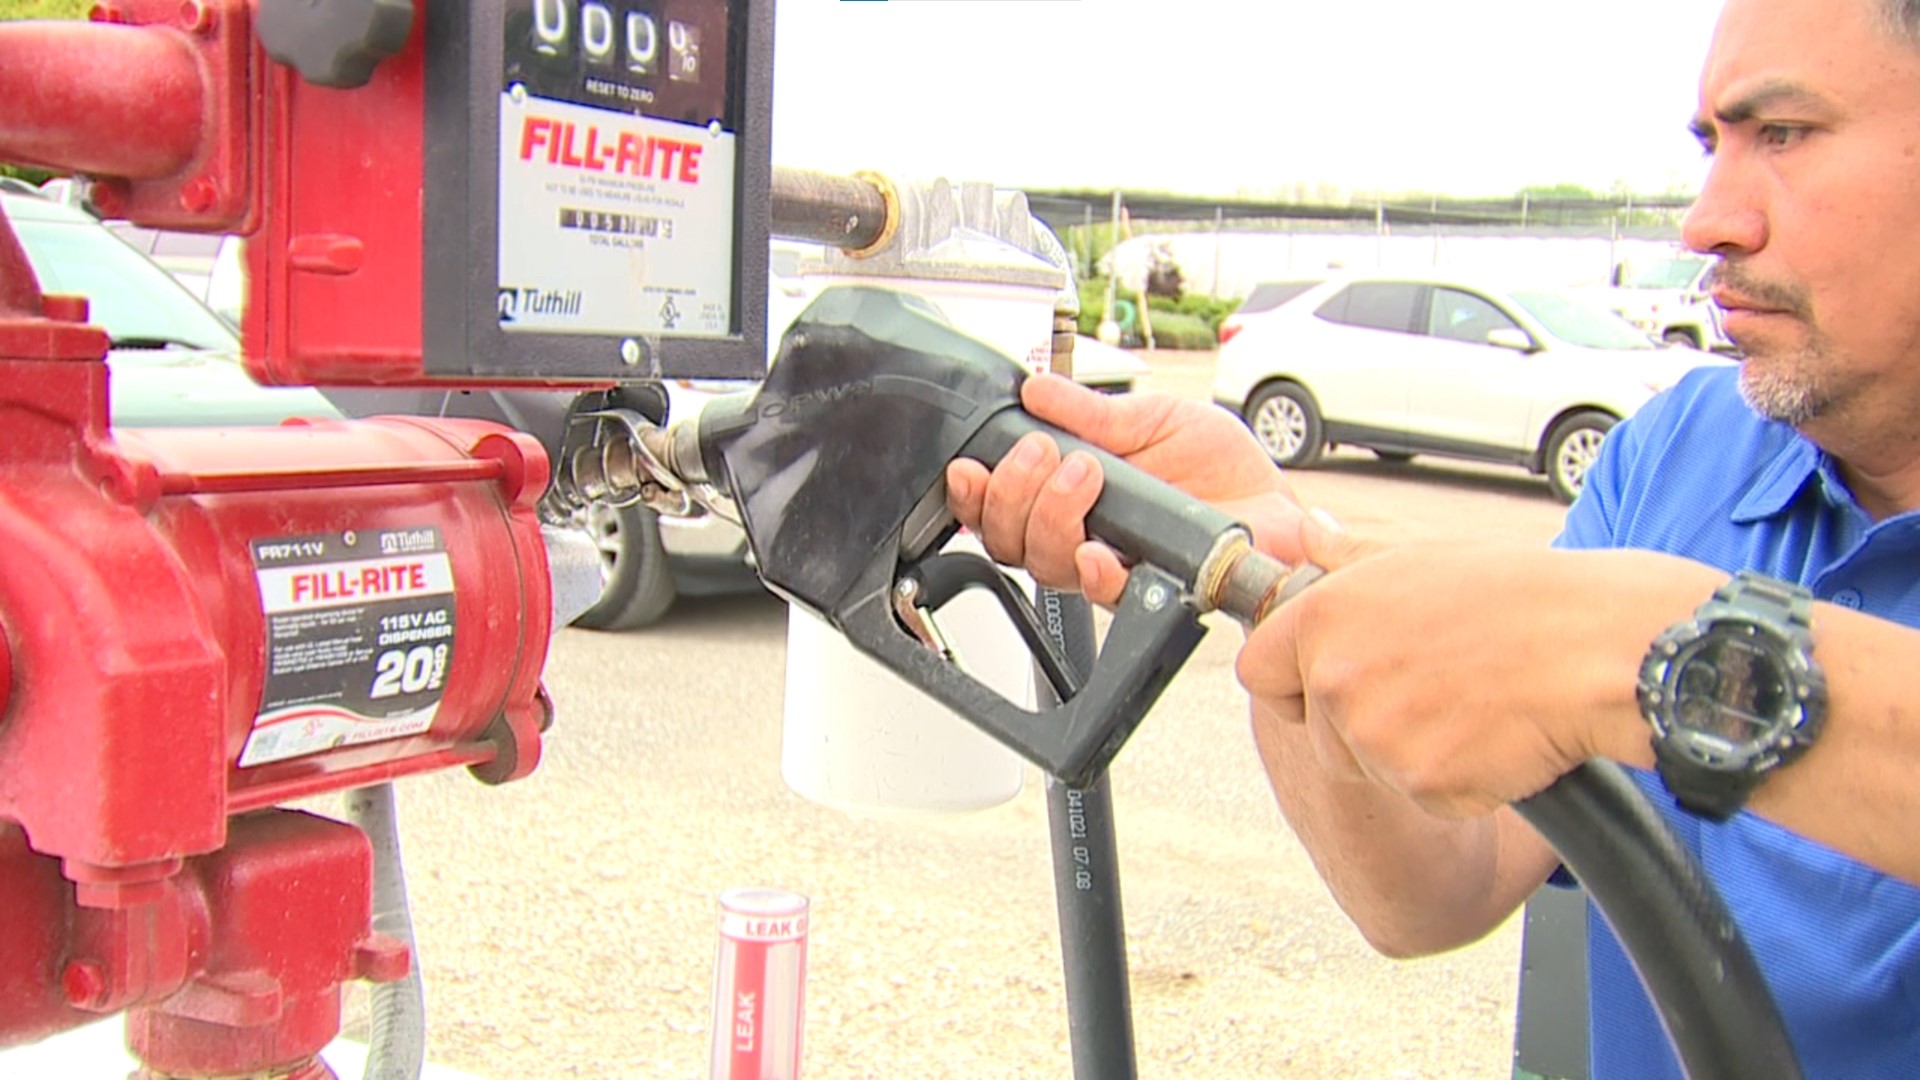 As of Friday, diesel prices are at more than $5 per gallon in every state. The fuel also hit a nation-wide record this week at $5.57 per gallon.